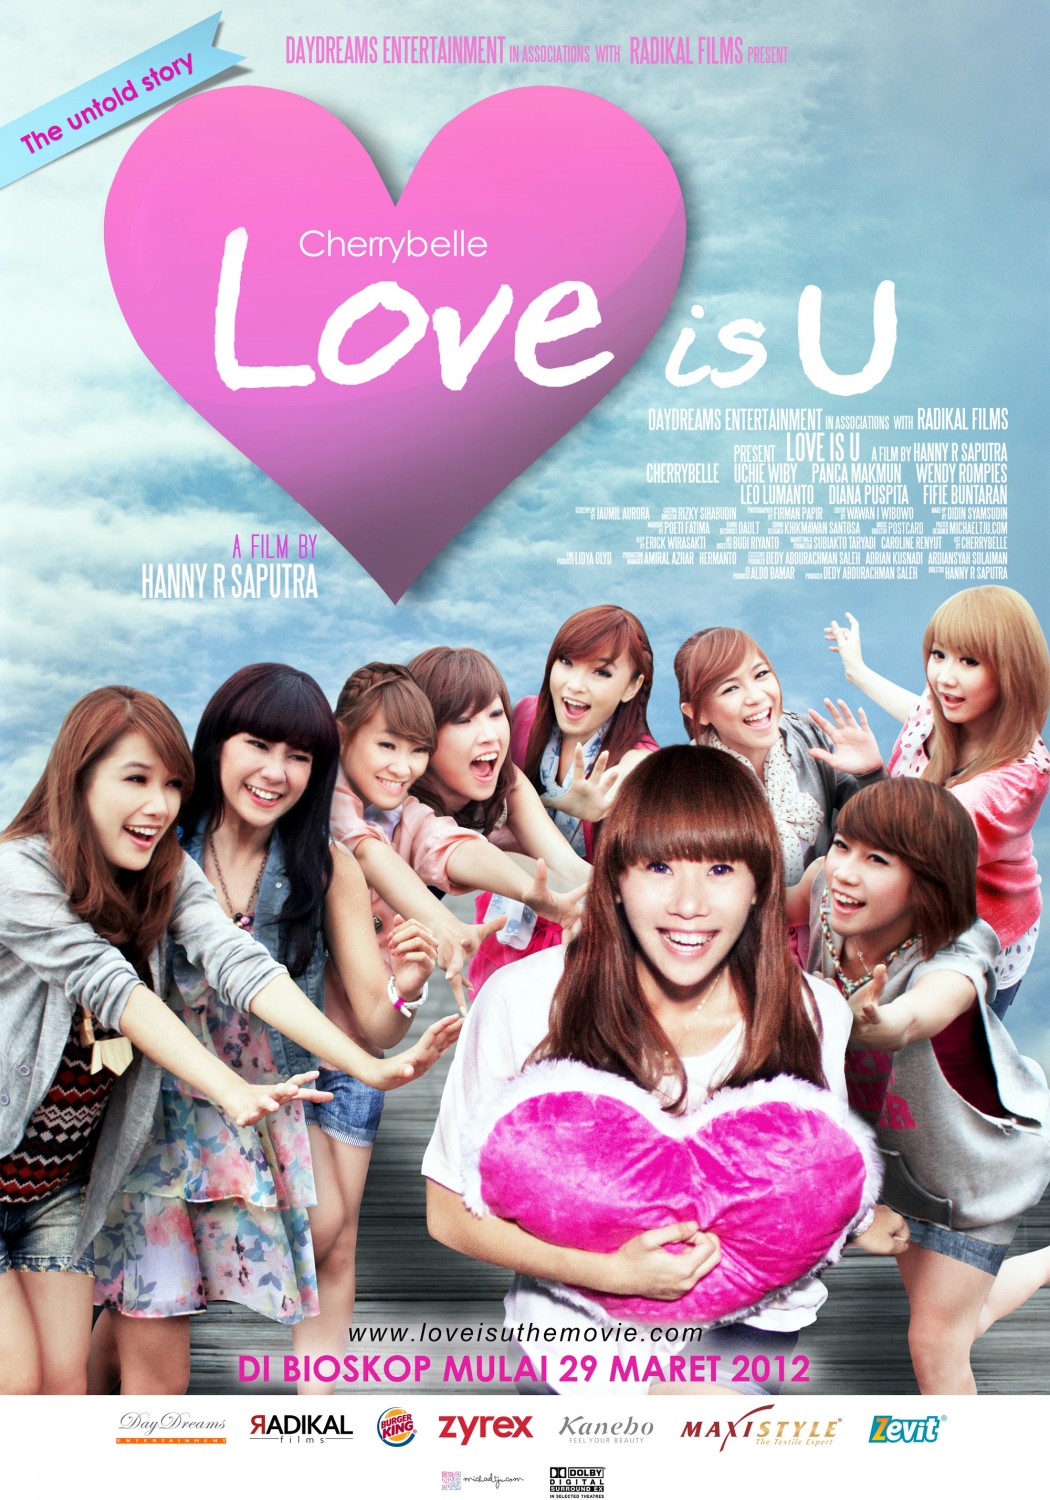 Extra Large Movie Poster Image for Love Is U 